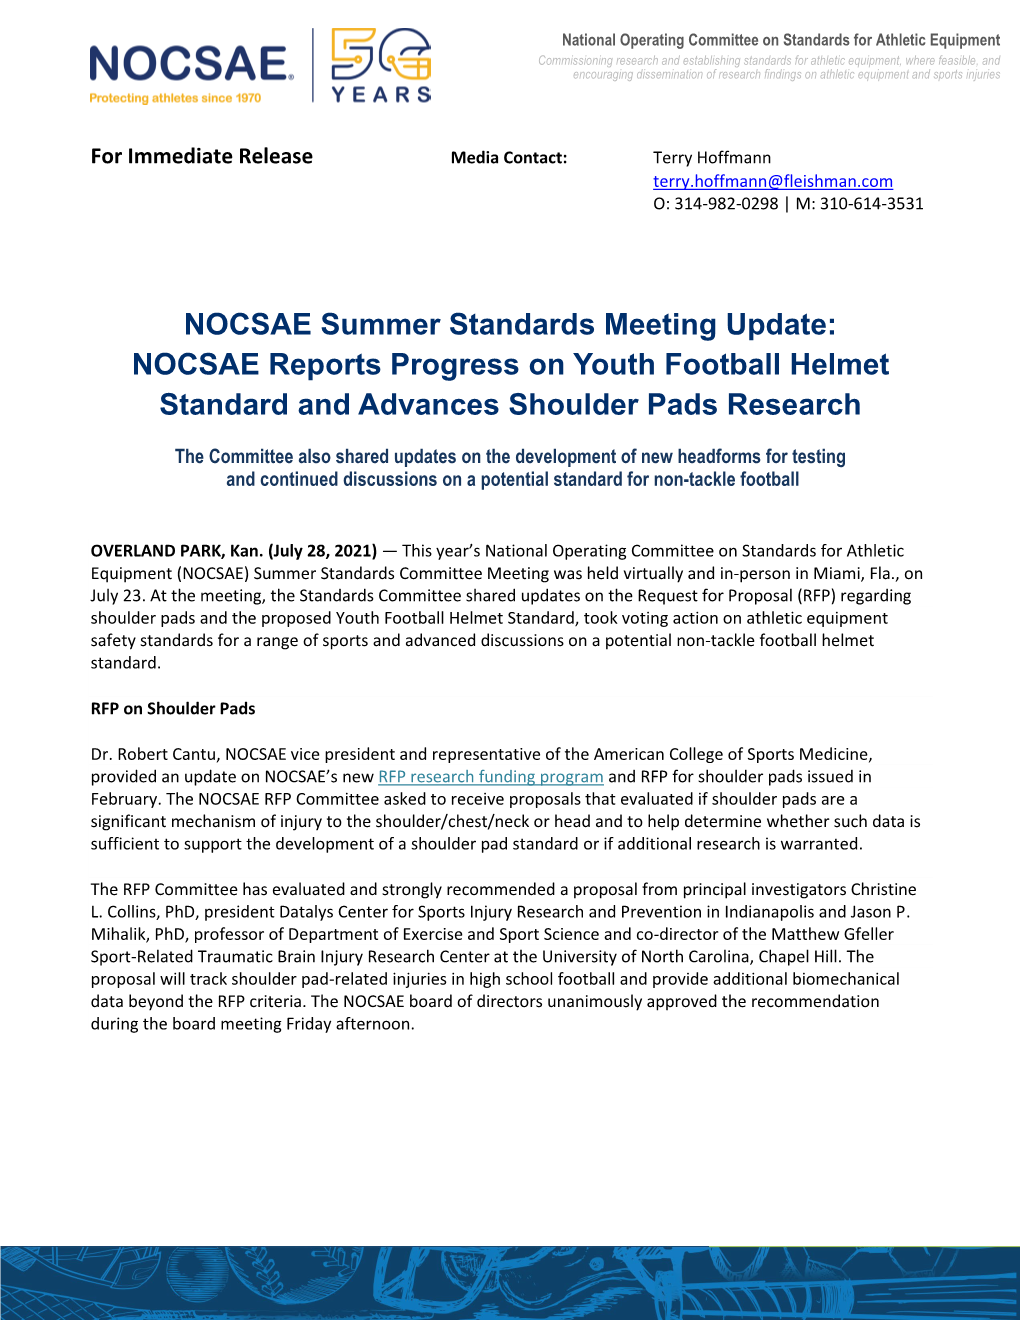 NOCSAE Summer Standards Meeting Update: NOCSAE Reports Progress on Youth Football Helmet Standard and Advances Shoulder Pads Research